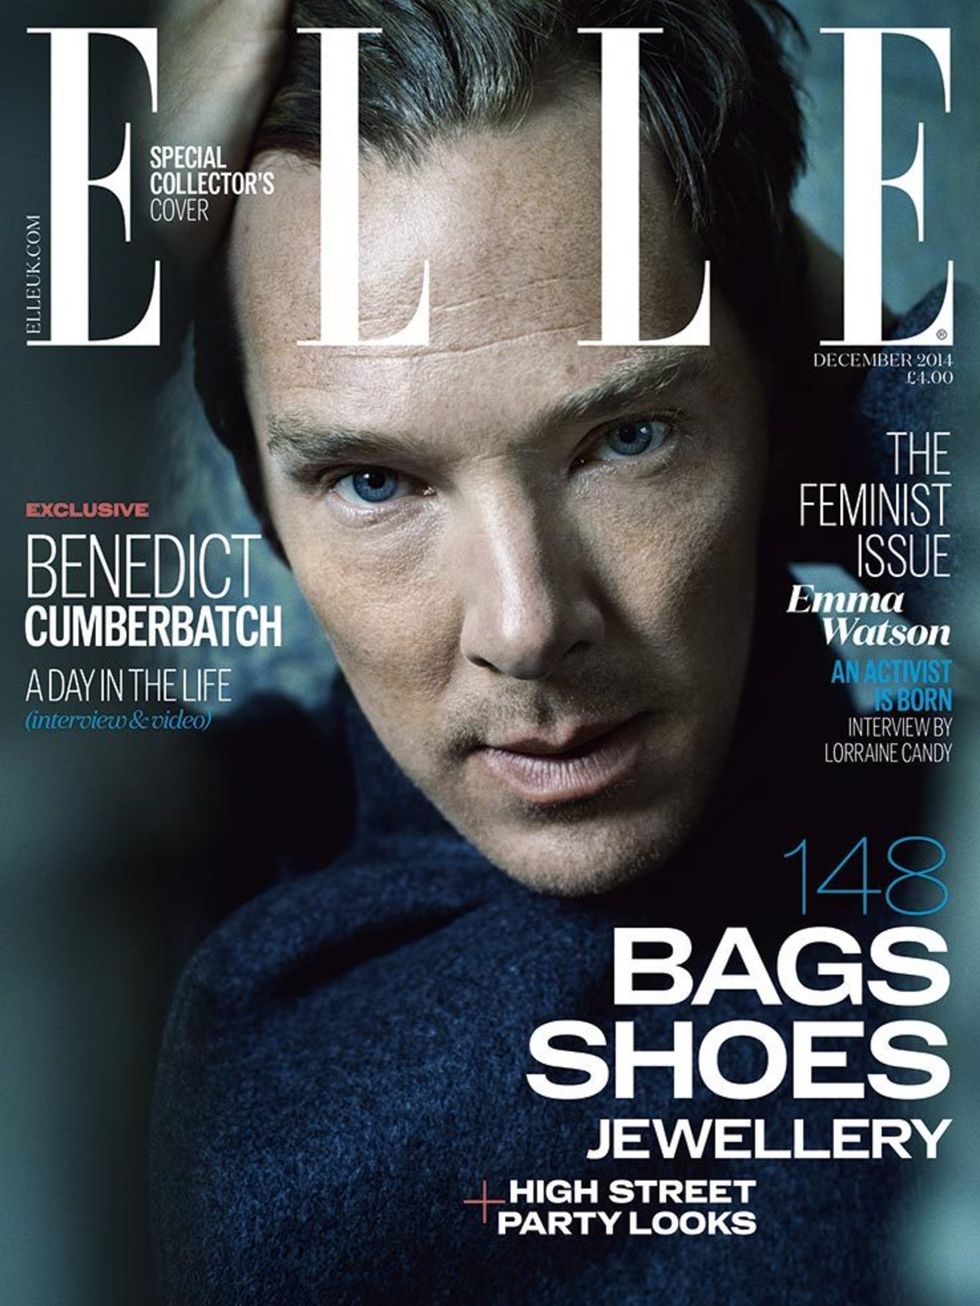 <p><a href="http://www.elleuk.com/tags/benedict-cumberbatch">Benedict Cumberbatch</a>, special cover, December 2014.</p>

<p><em><a href="http://www.elleuk.com/subscribe" style="color: rgb(7, 130, 193);">Subscribe to ELLE today and never miss an issue</a>